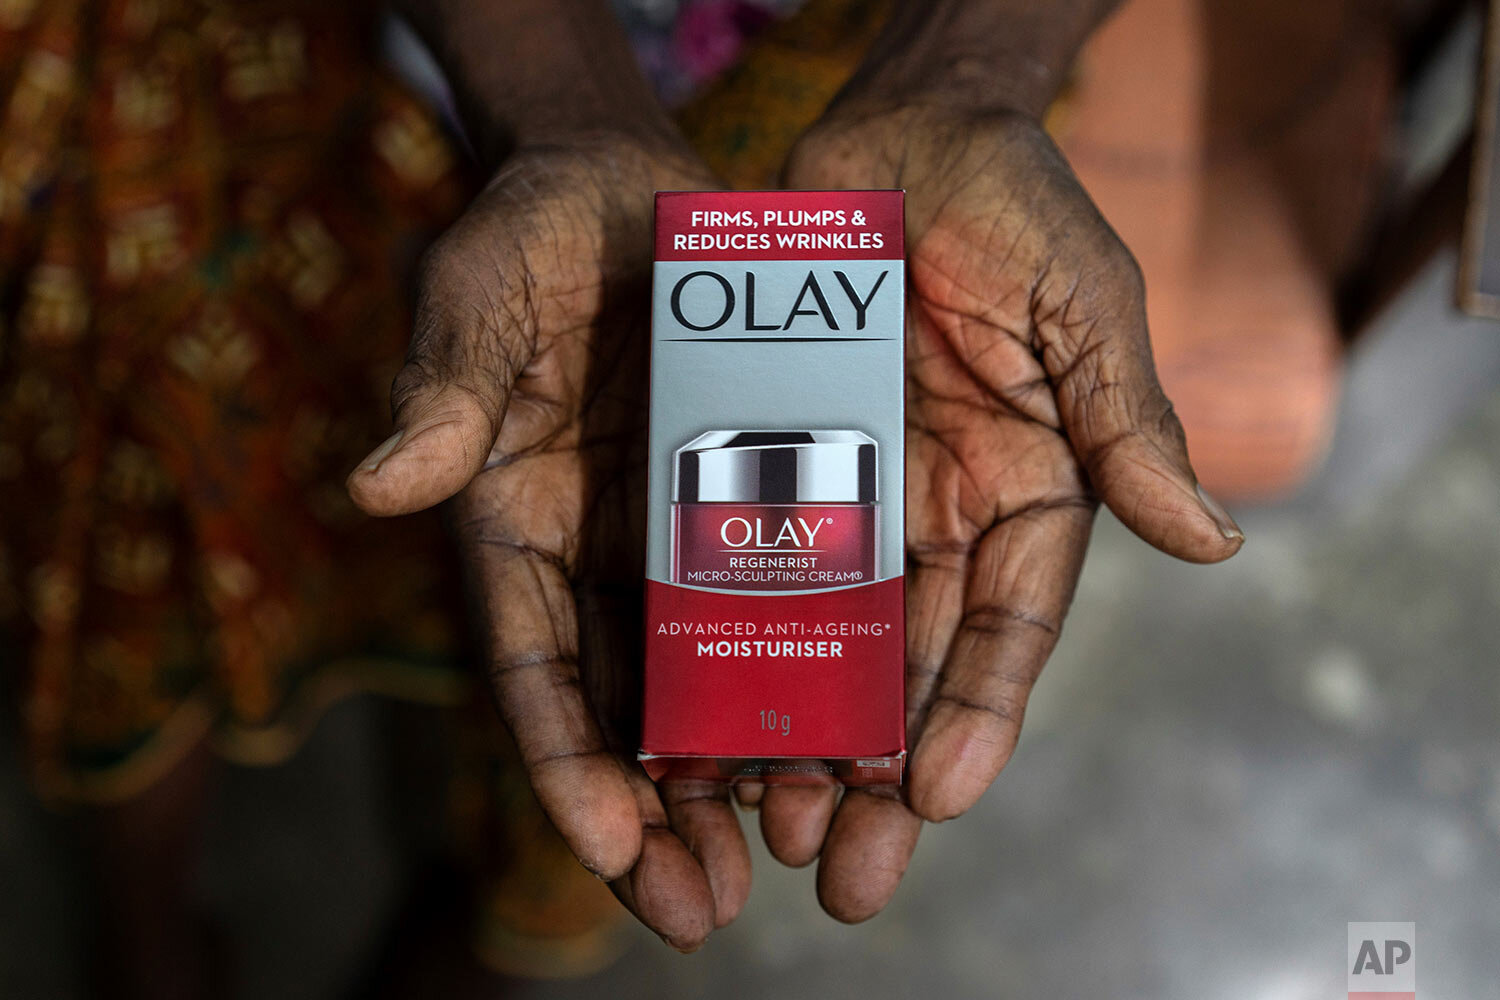  A 102-year-old woman holds a skincare product outside her house in Malaysia, on Wednesday, Nov. 11, 2020. Her parents were migrant workers and brought her to the country from India when she was a baby so the family could work on a rubber plantation,